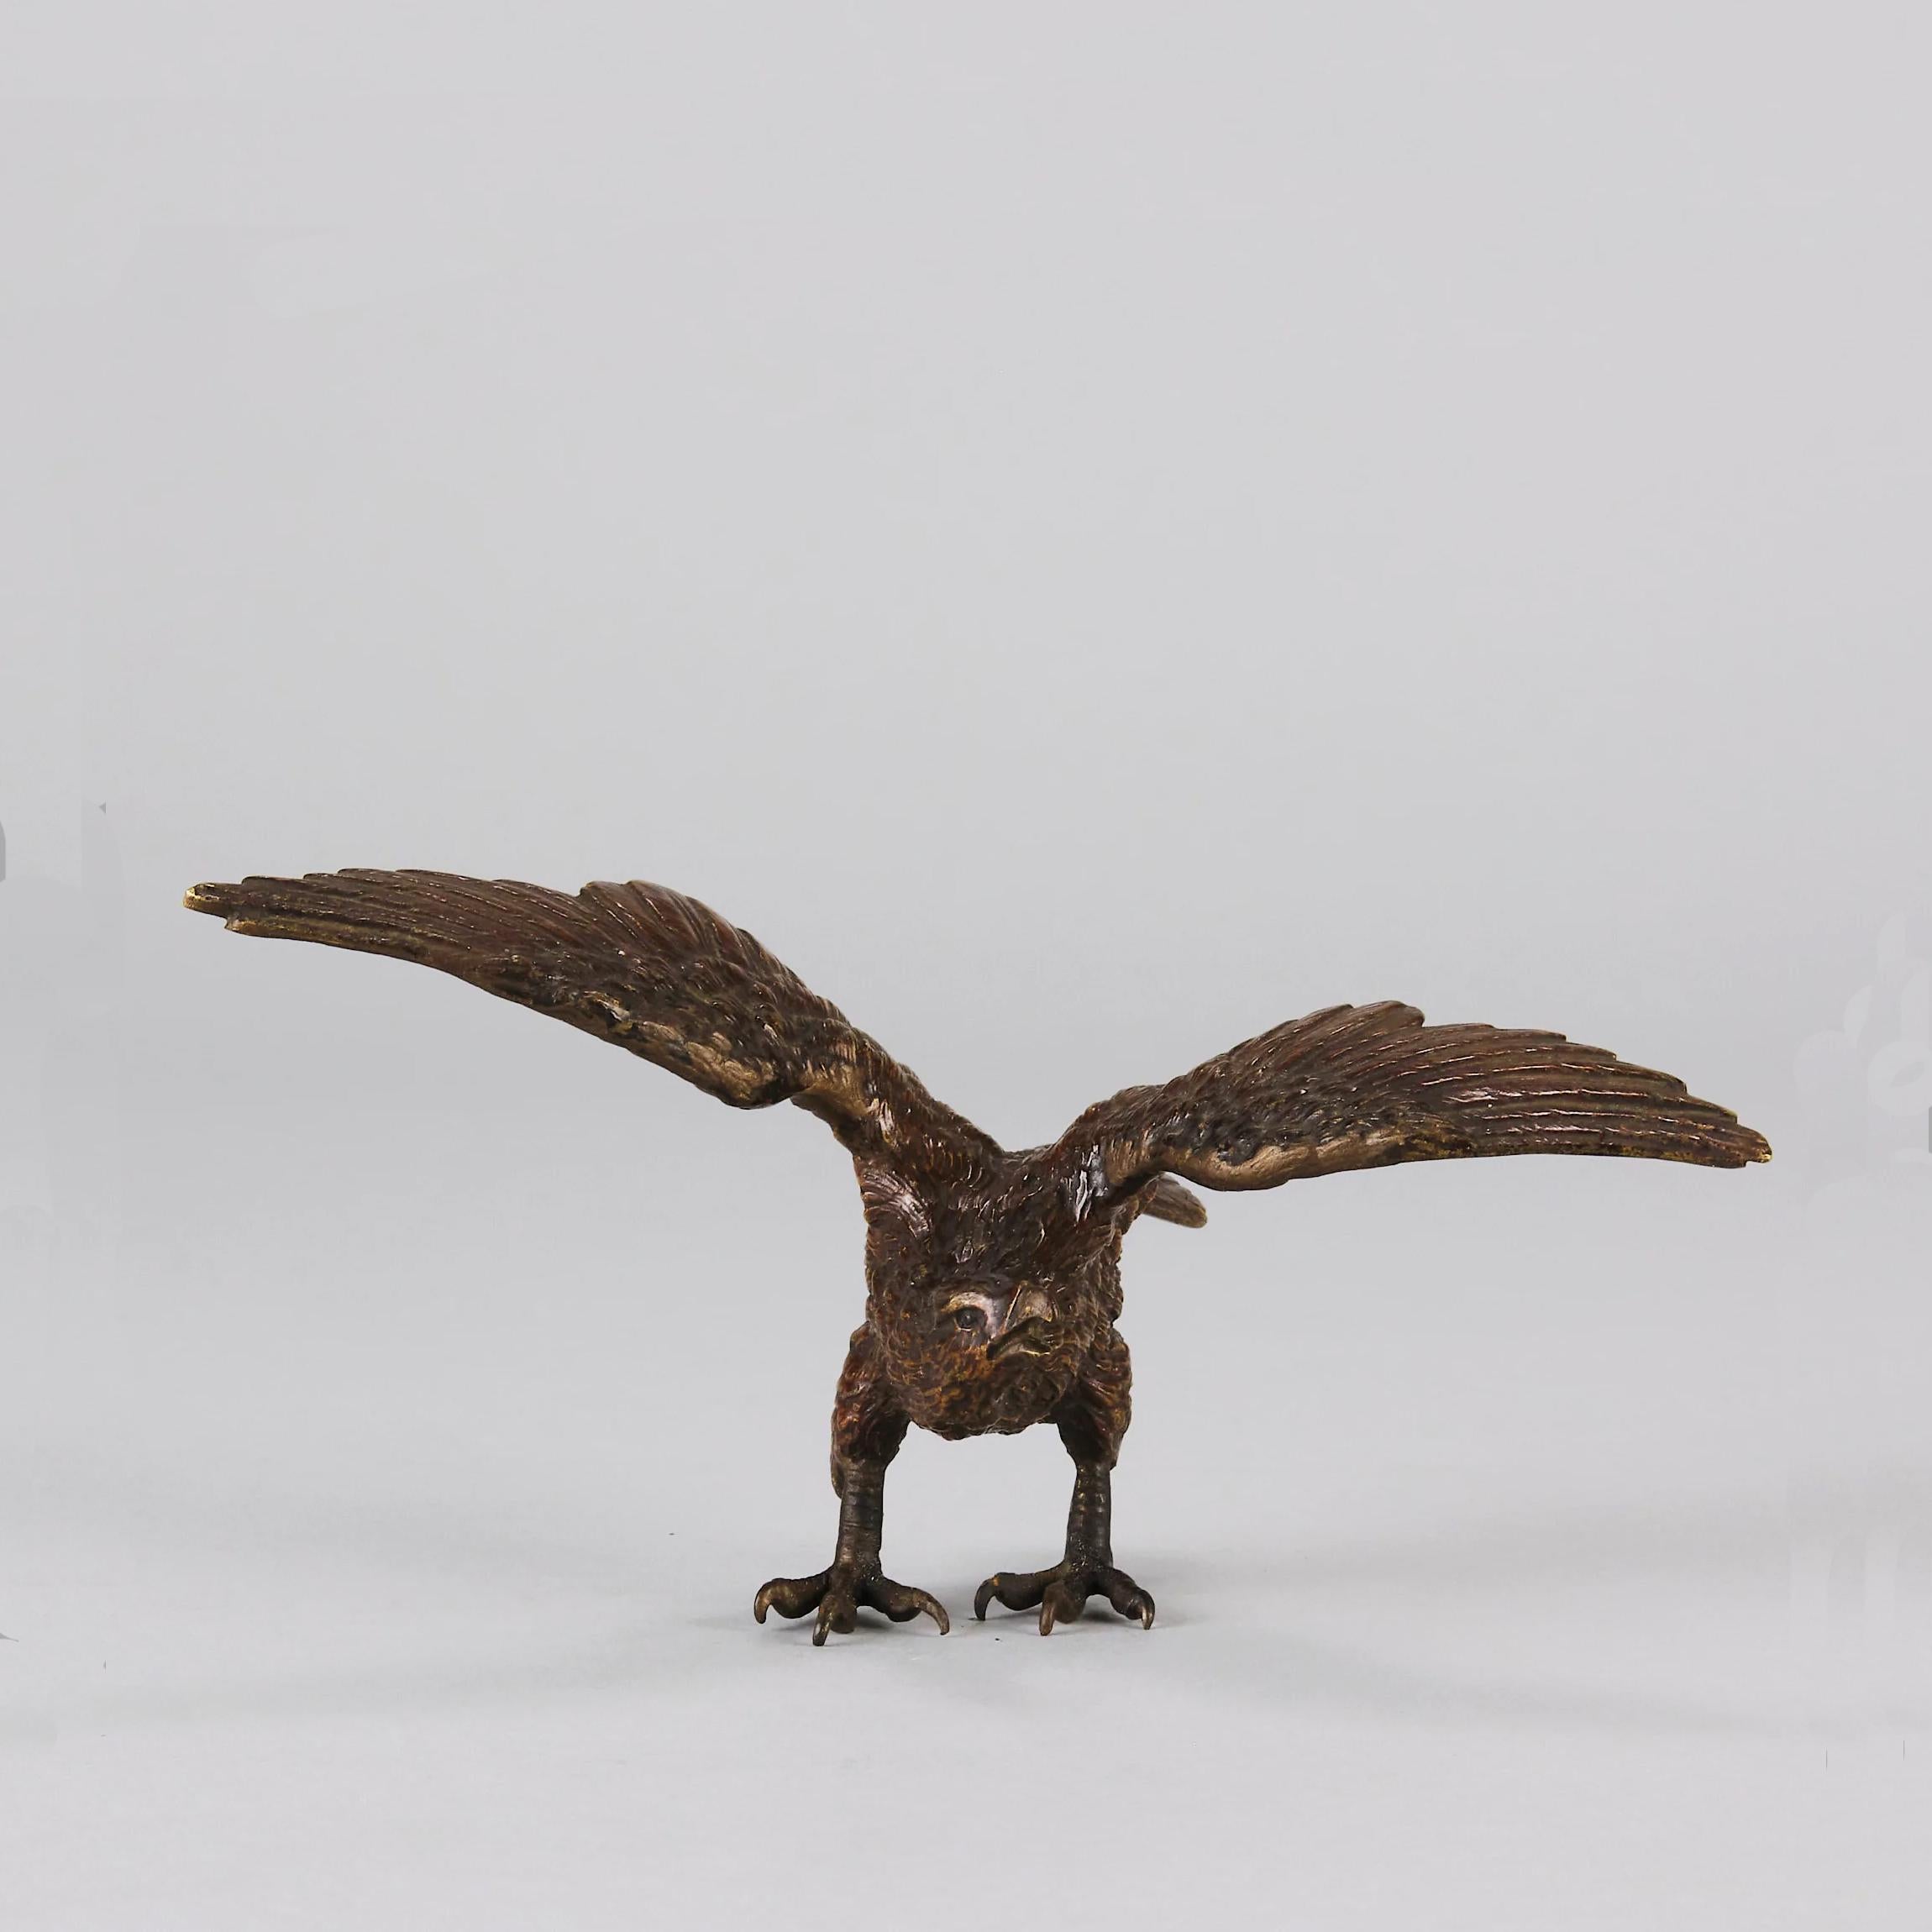 A very fine early 20th Century cold painted Austrian bronze study of an eagle spreading its wings. The sculpture balances naturally on the talons of the eagle, free standing this a marvellous representation for these free and noble creatures. The